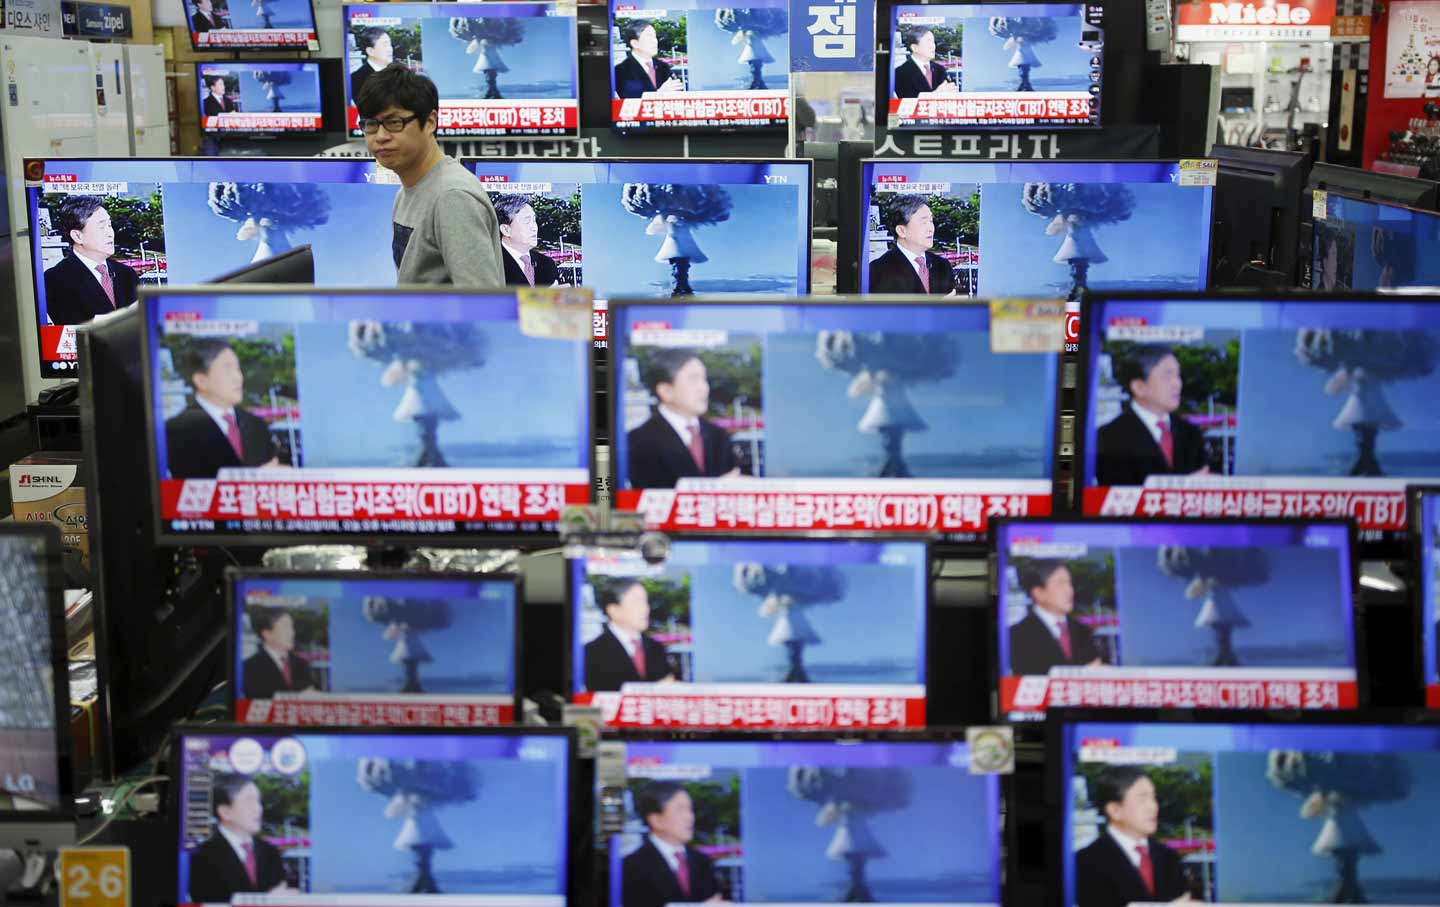 Televisions broadcast a report on North Korea's nuclear test.